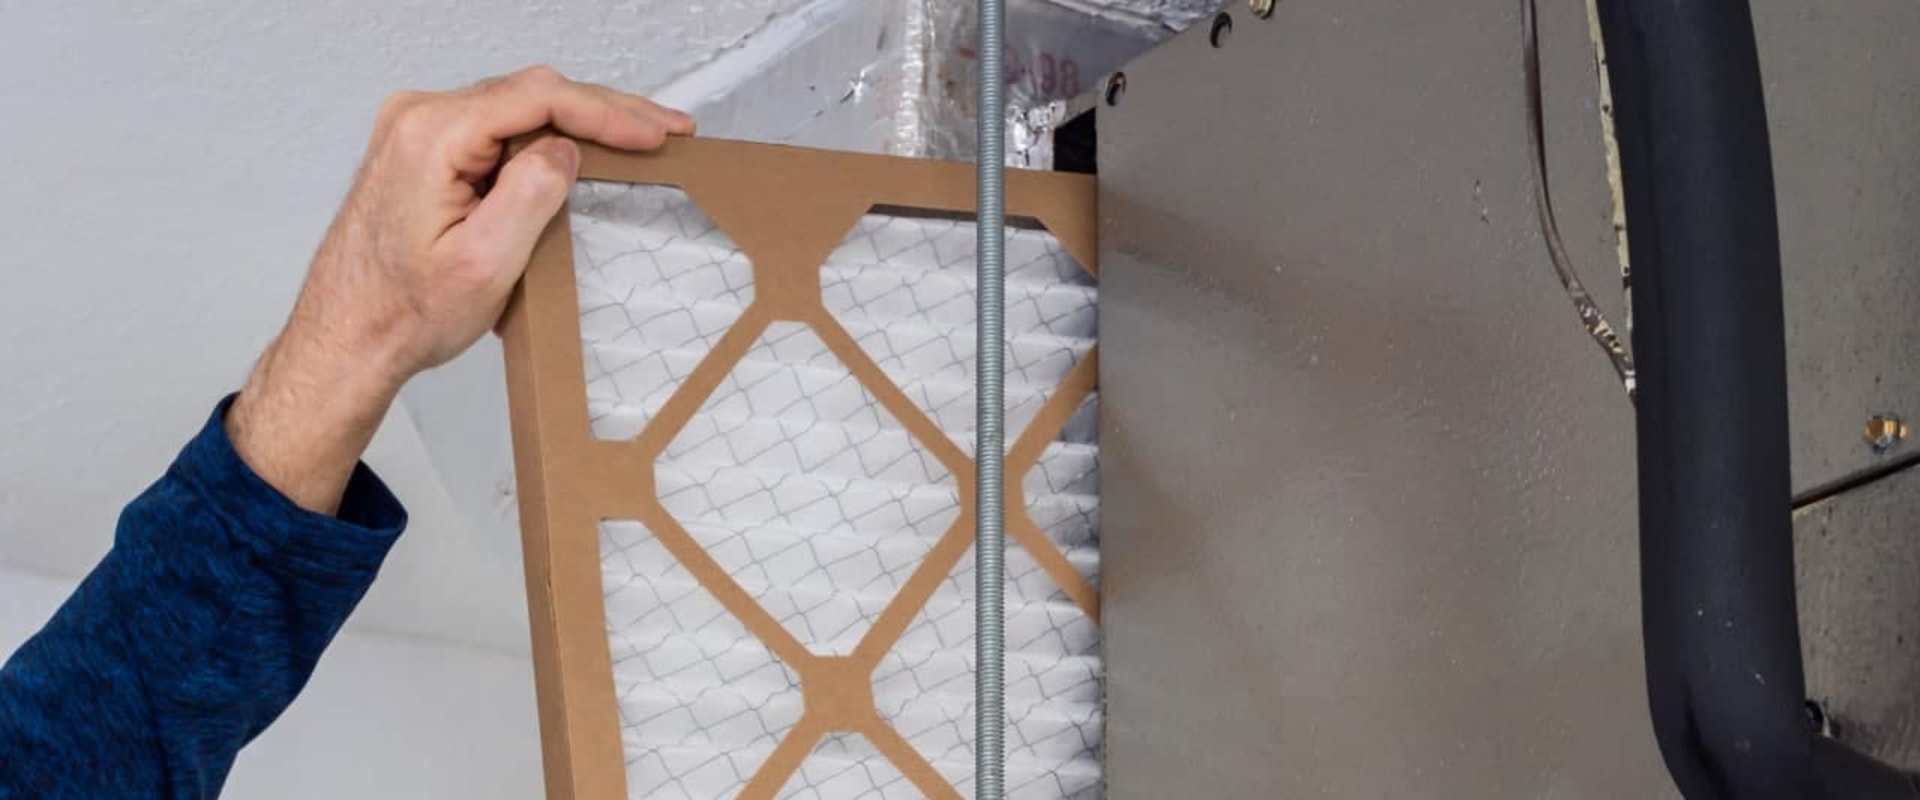 Upgrade Your HVAC System with 20x25x5 Furnace Air Filters